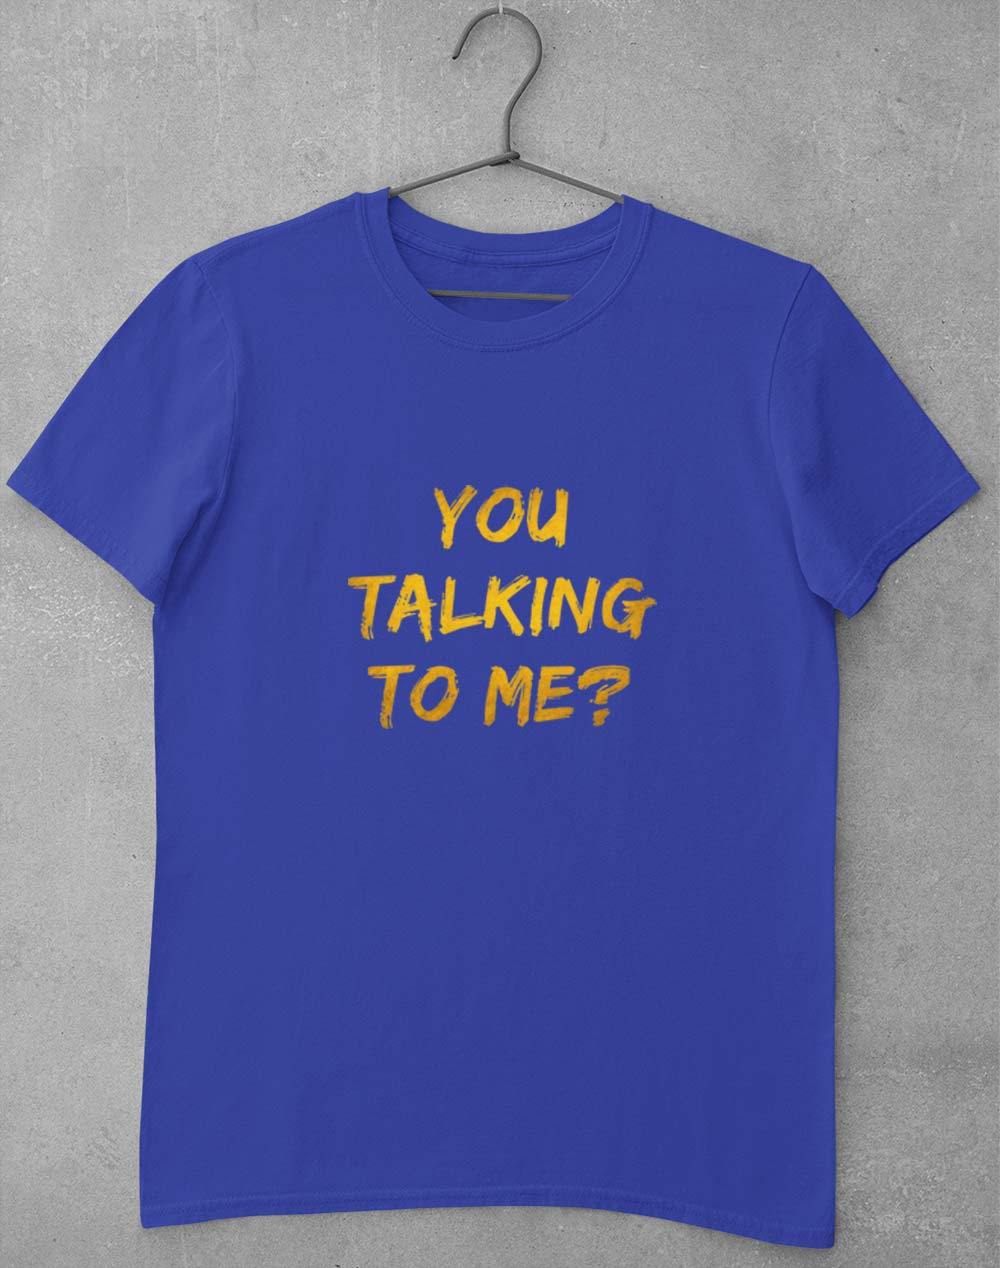 You Talking To Me? T-Shirt S / Royal Blue  - Off World Tees